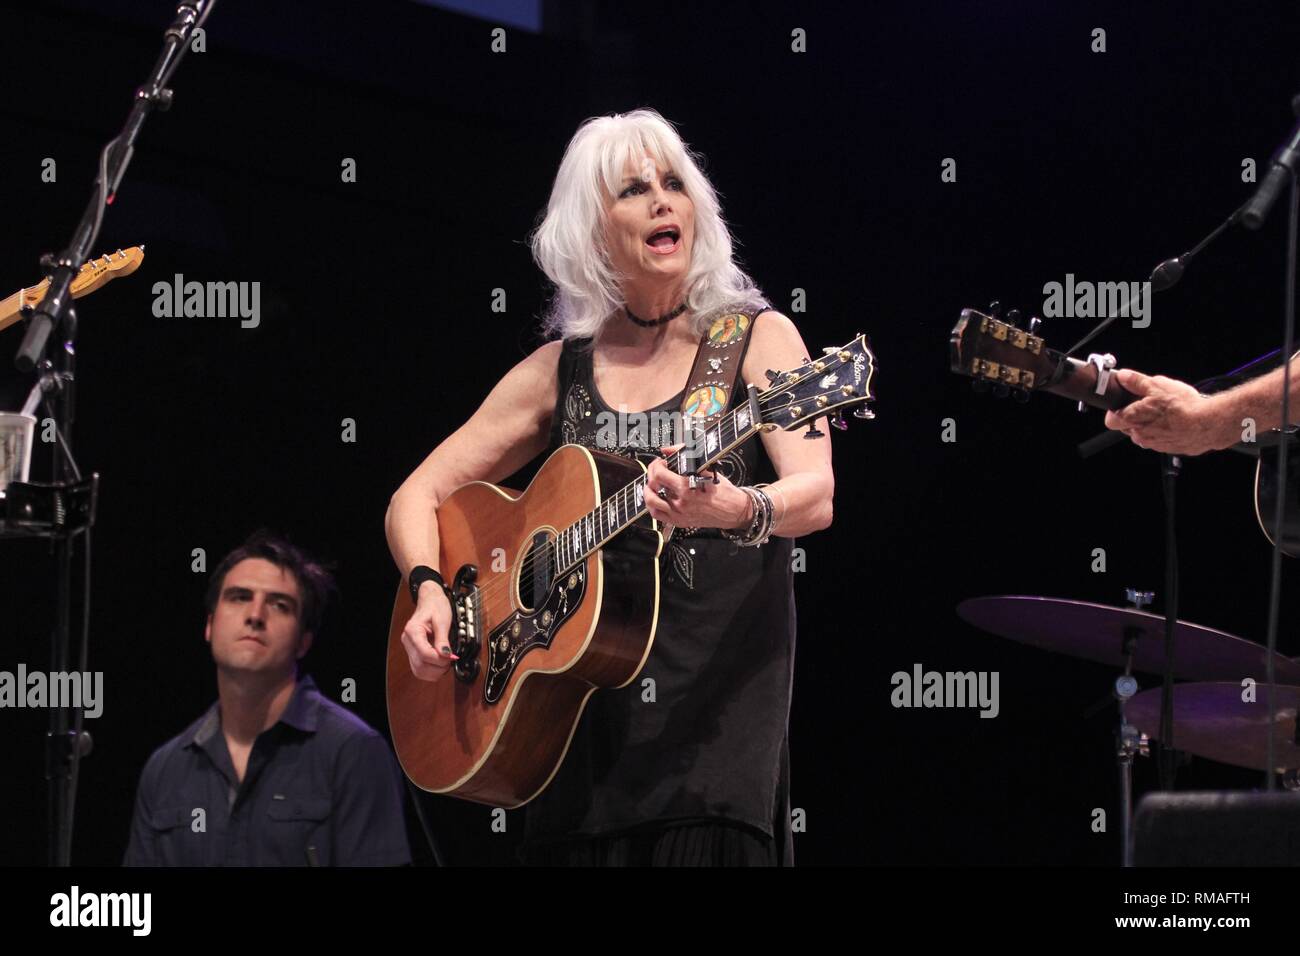 Singer, songwriter and guitarist Emmylou Harris is shown performing on stage during a 'live' concert appearance. Stock Photo